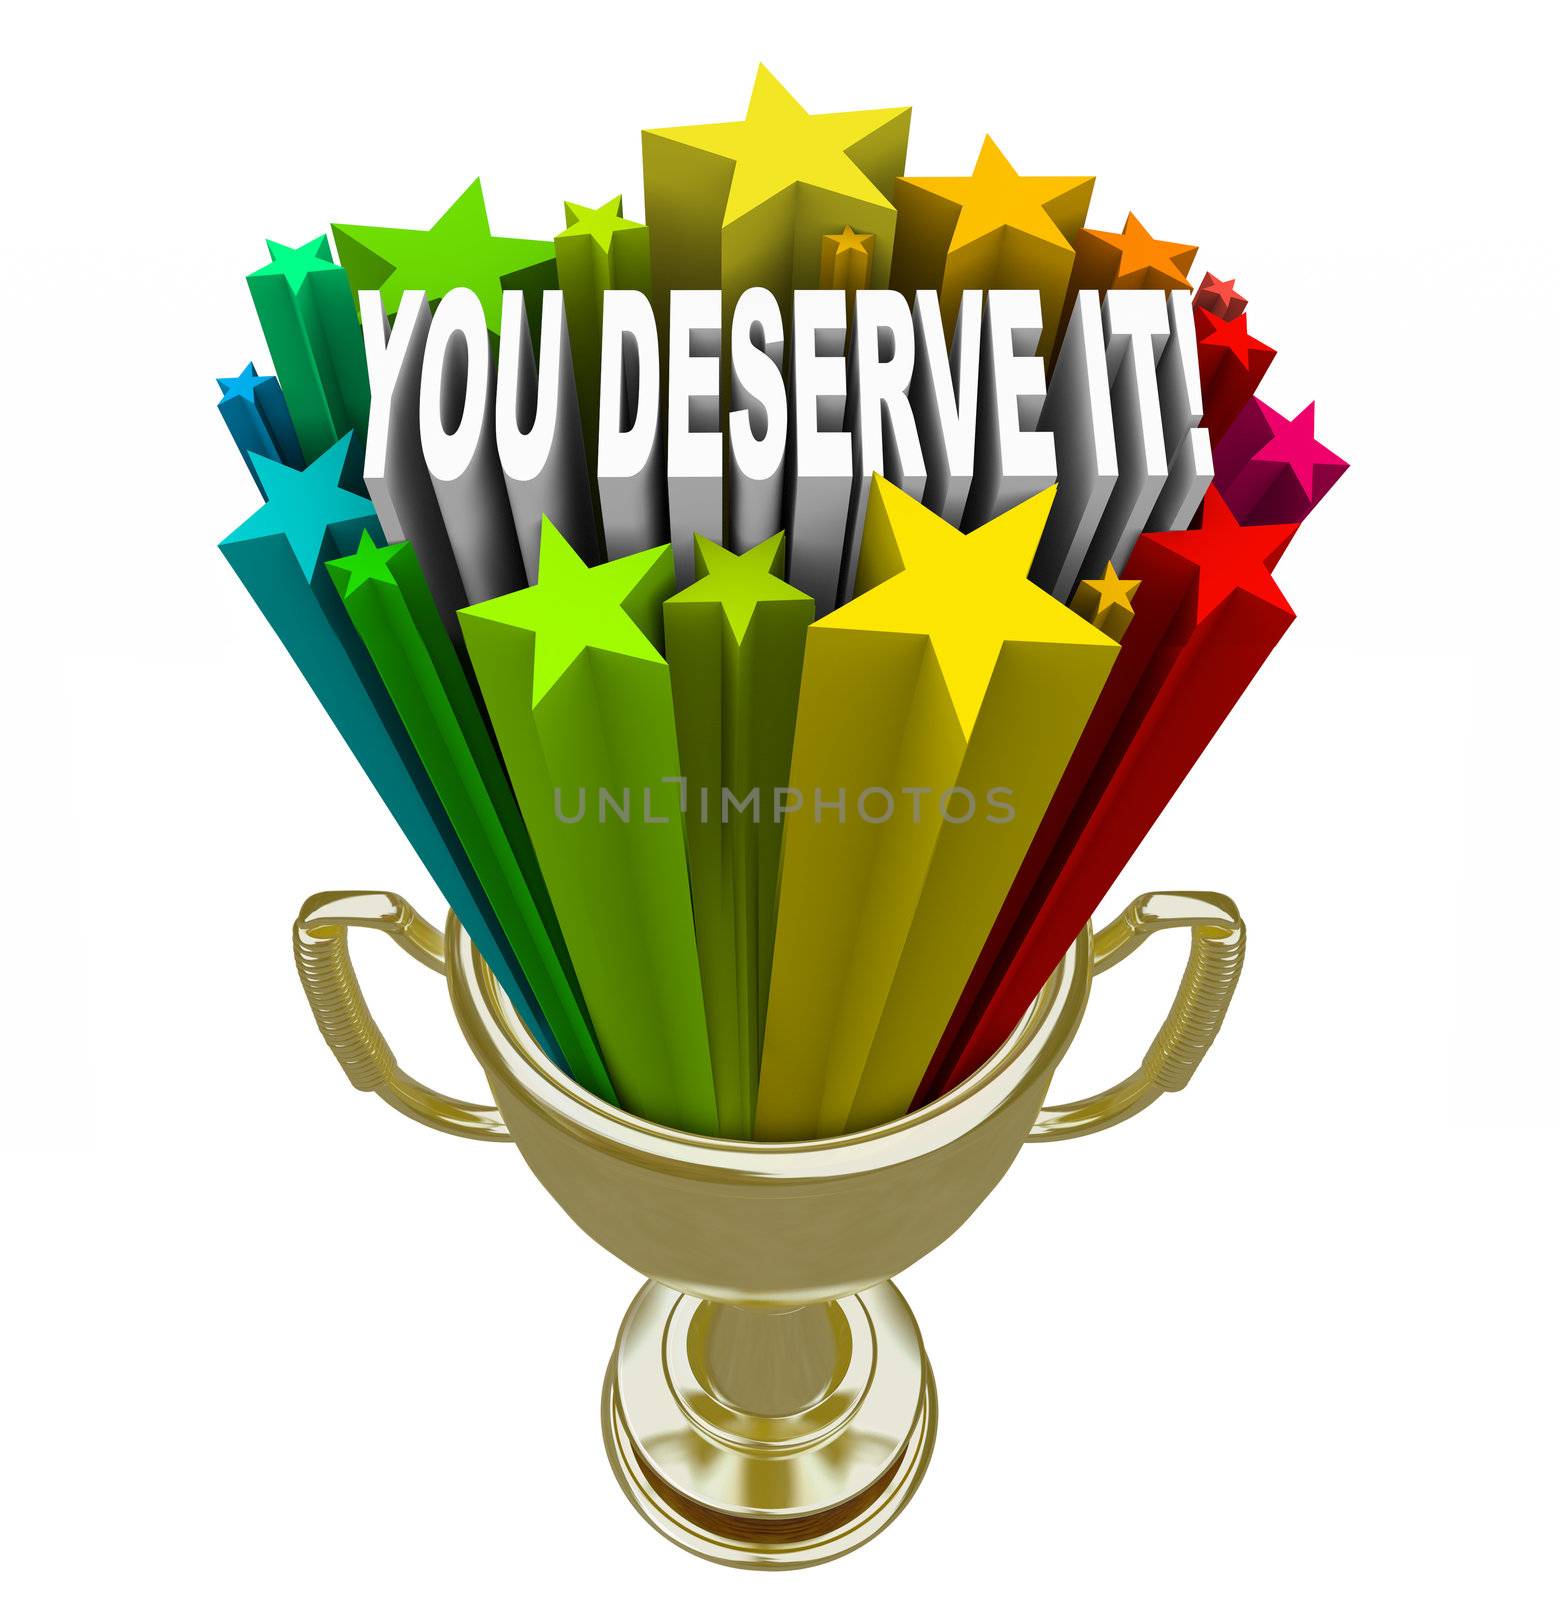 Appreciation and Recognition symbolized by a gold trophy with a burst of stars shooting out of it with the words You Deserve It, a sign of merit and worthiness for your efforts